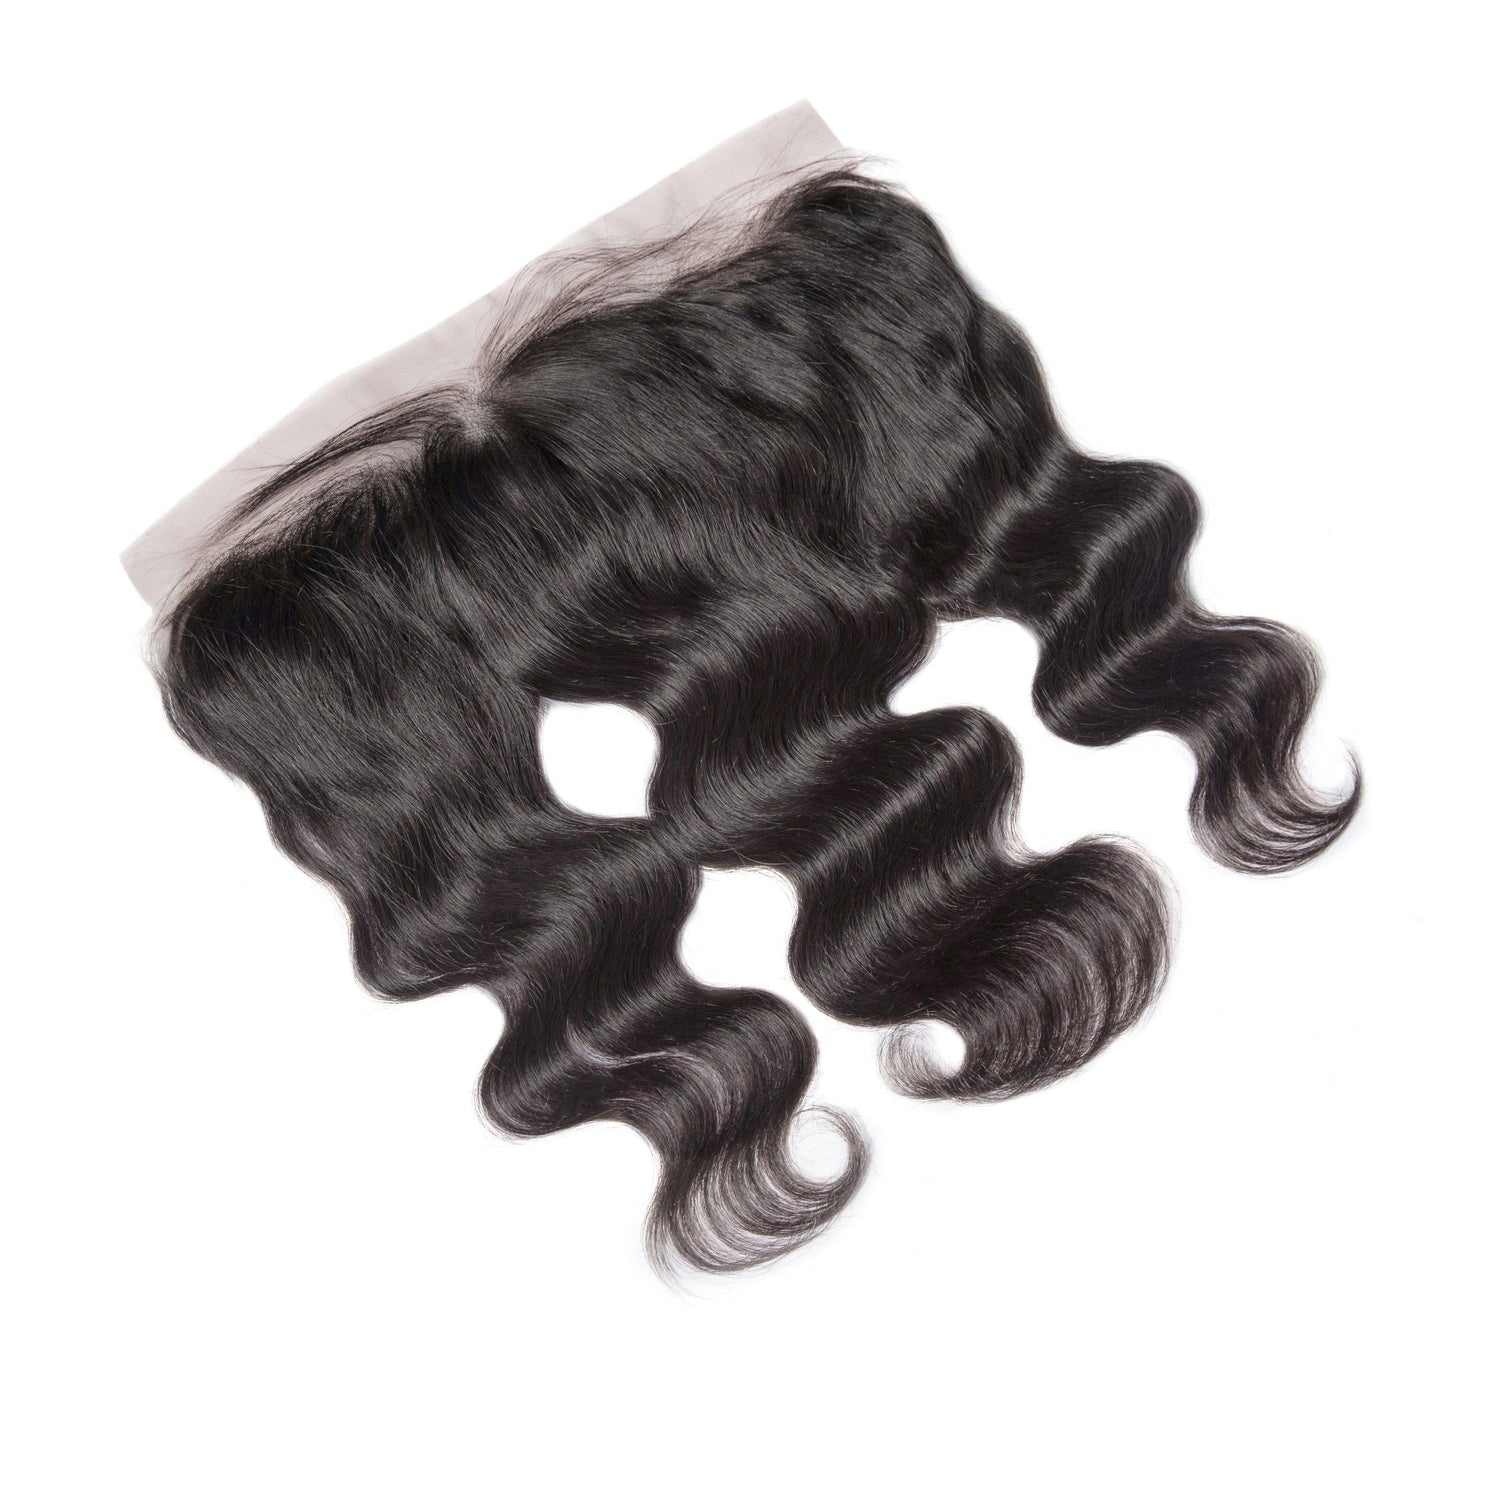 Natural Color Body Wave 13x4 Lace Frontal 100% Virgin Hair Free Part - SHINE HAIR WIG